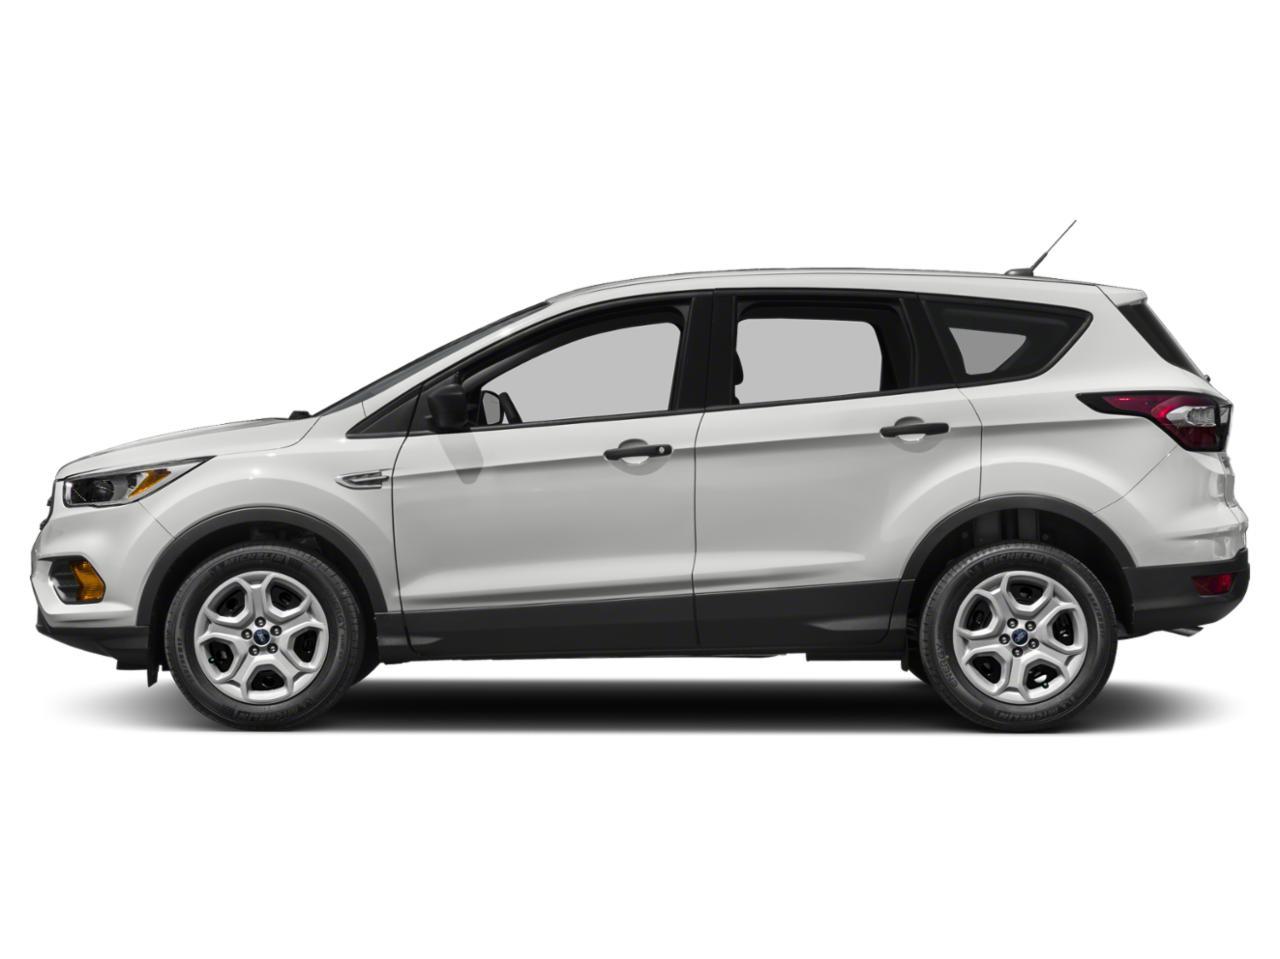 Used 2018 Ford Escape SEL with VIN 1FMCU9HD9JUC02029 for sale in Jackson, OH